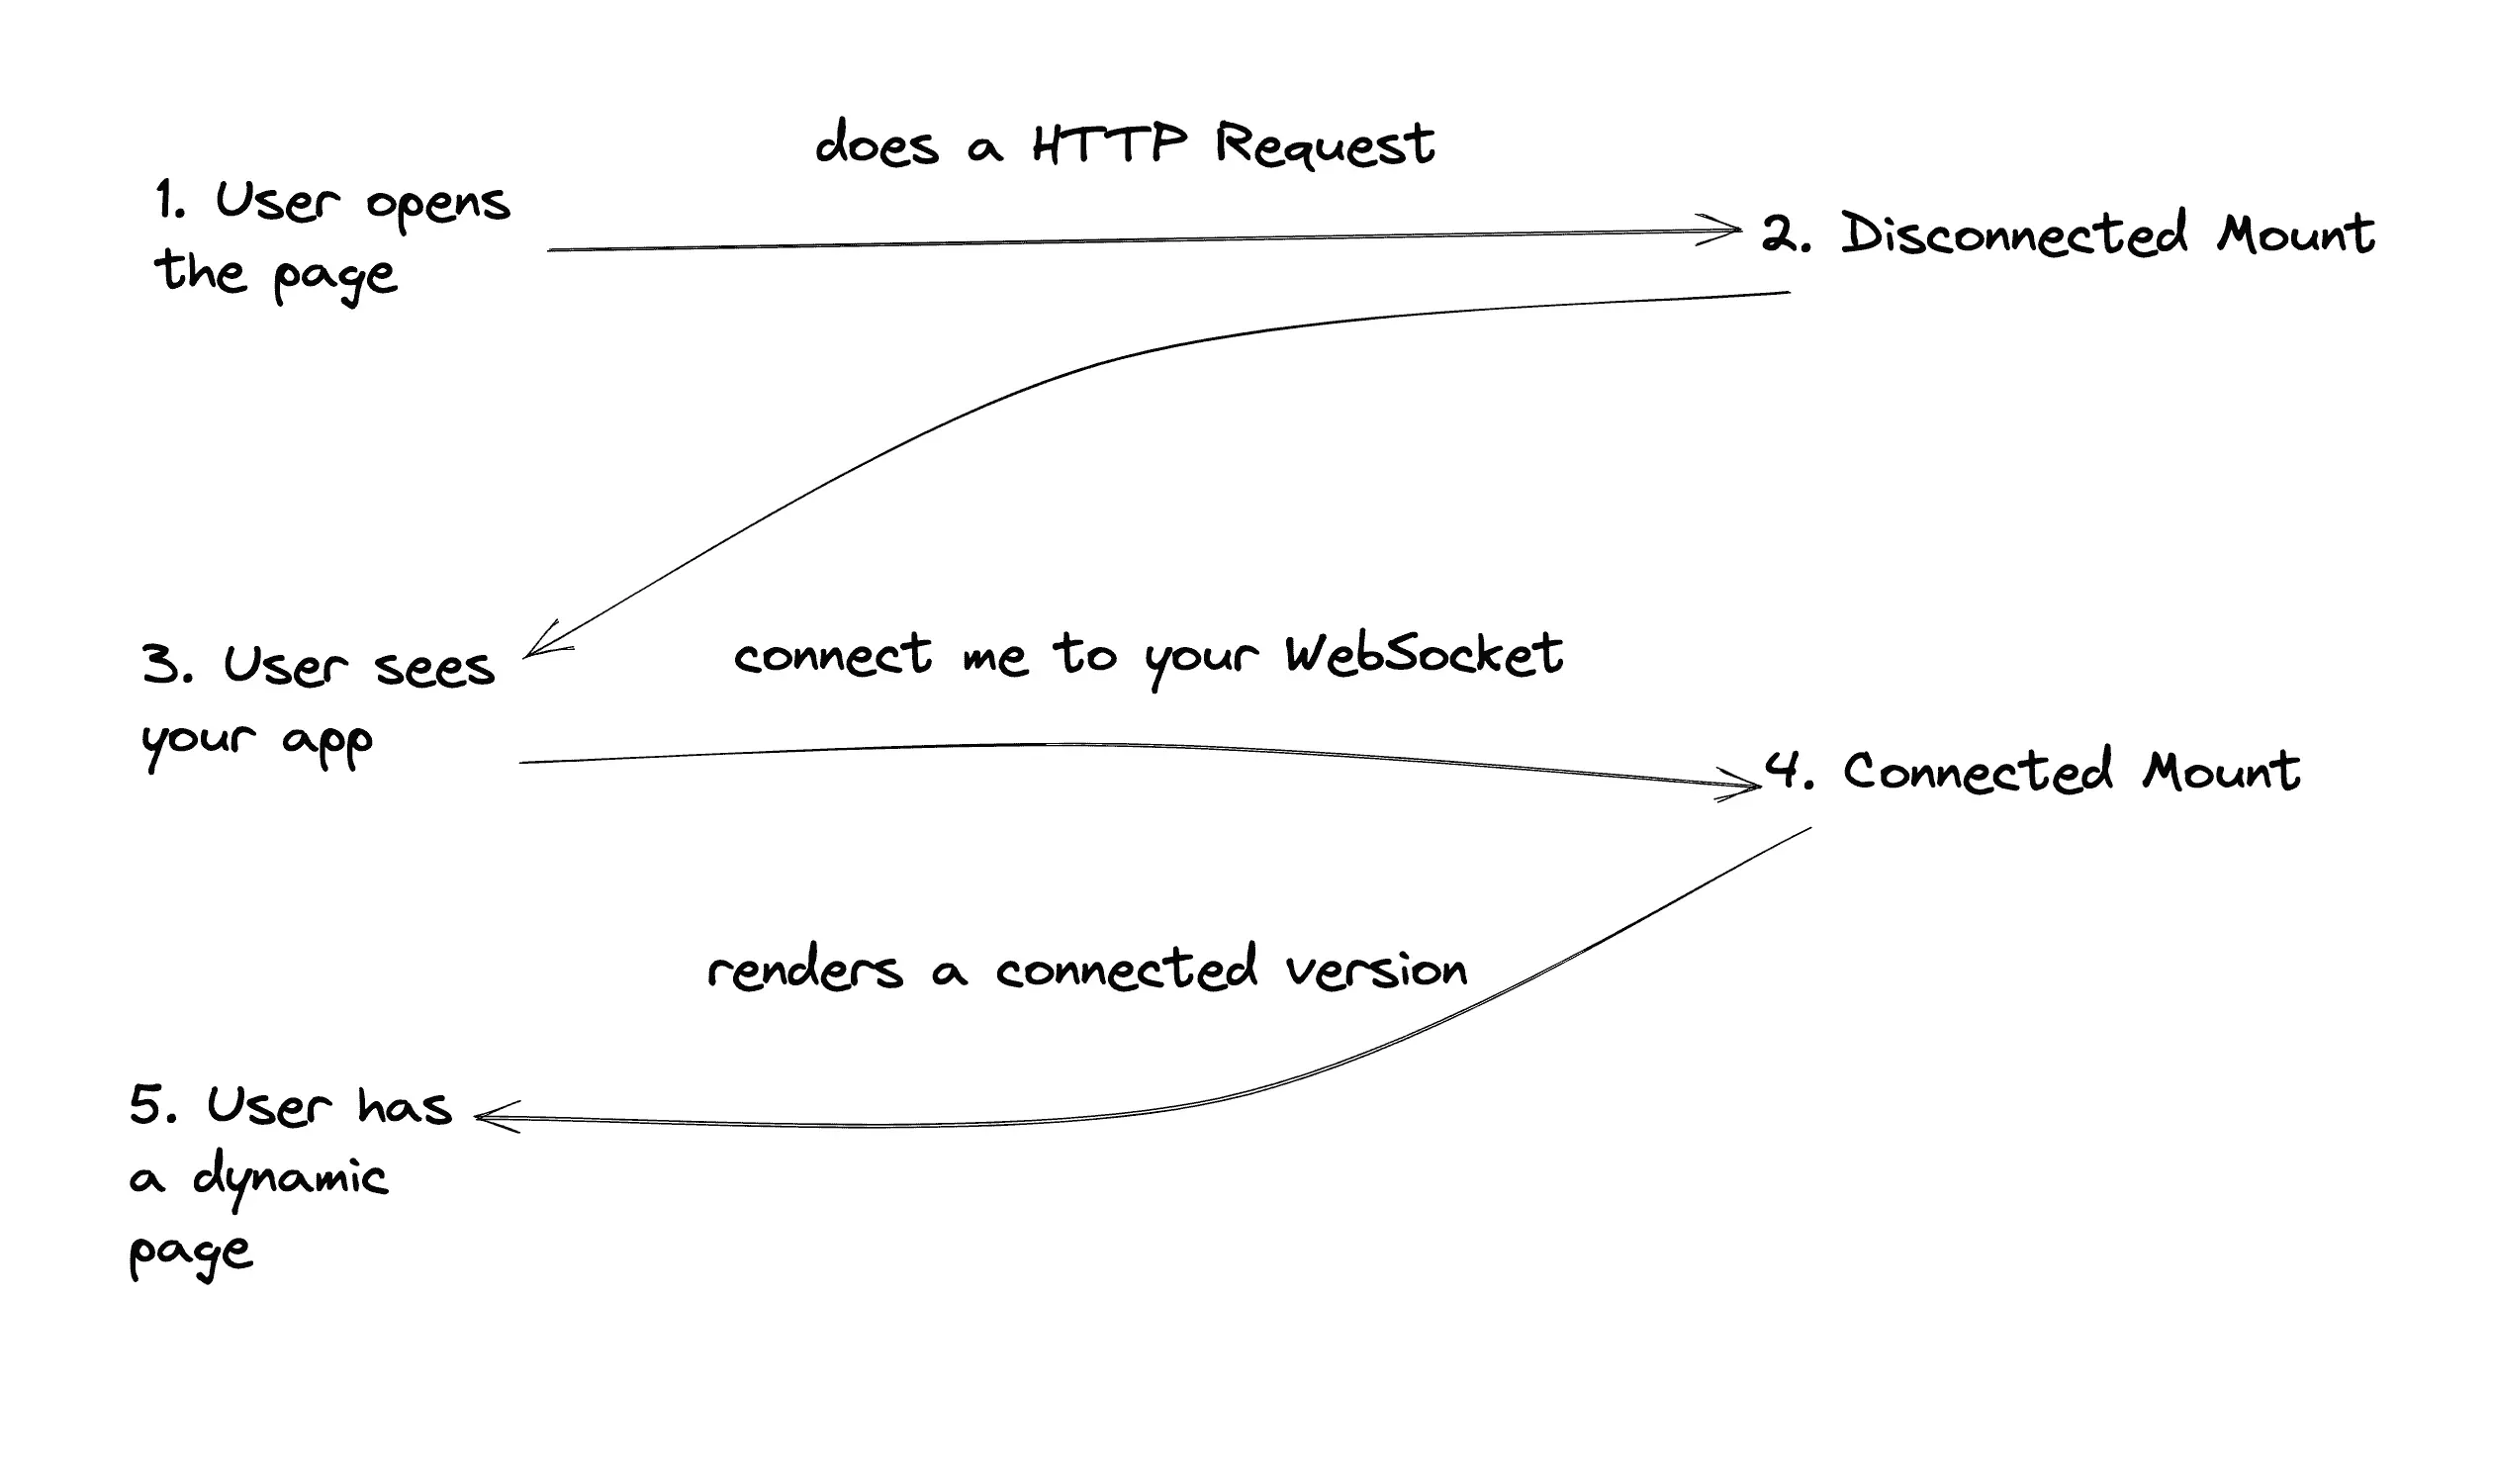 A sequence of 5 states connected by arrows: the first state is your user opening the page doing a HTTP request, the second state is LiveView rendering a disconnected mount, the third state is the user seeing the app and requesting to be connected to the WebSocket, the fourth state is LiveView rendering a connected version and replying to the user, and the fifth and final state is the user having a dynamic web page.